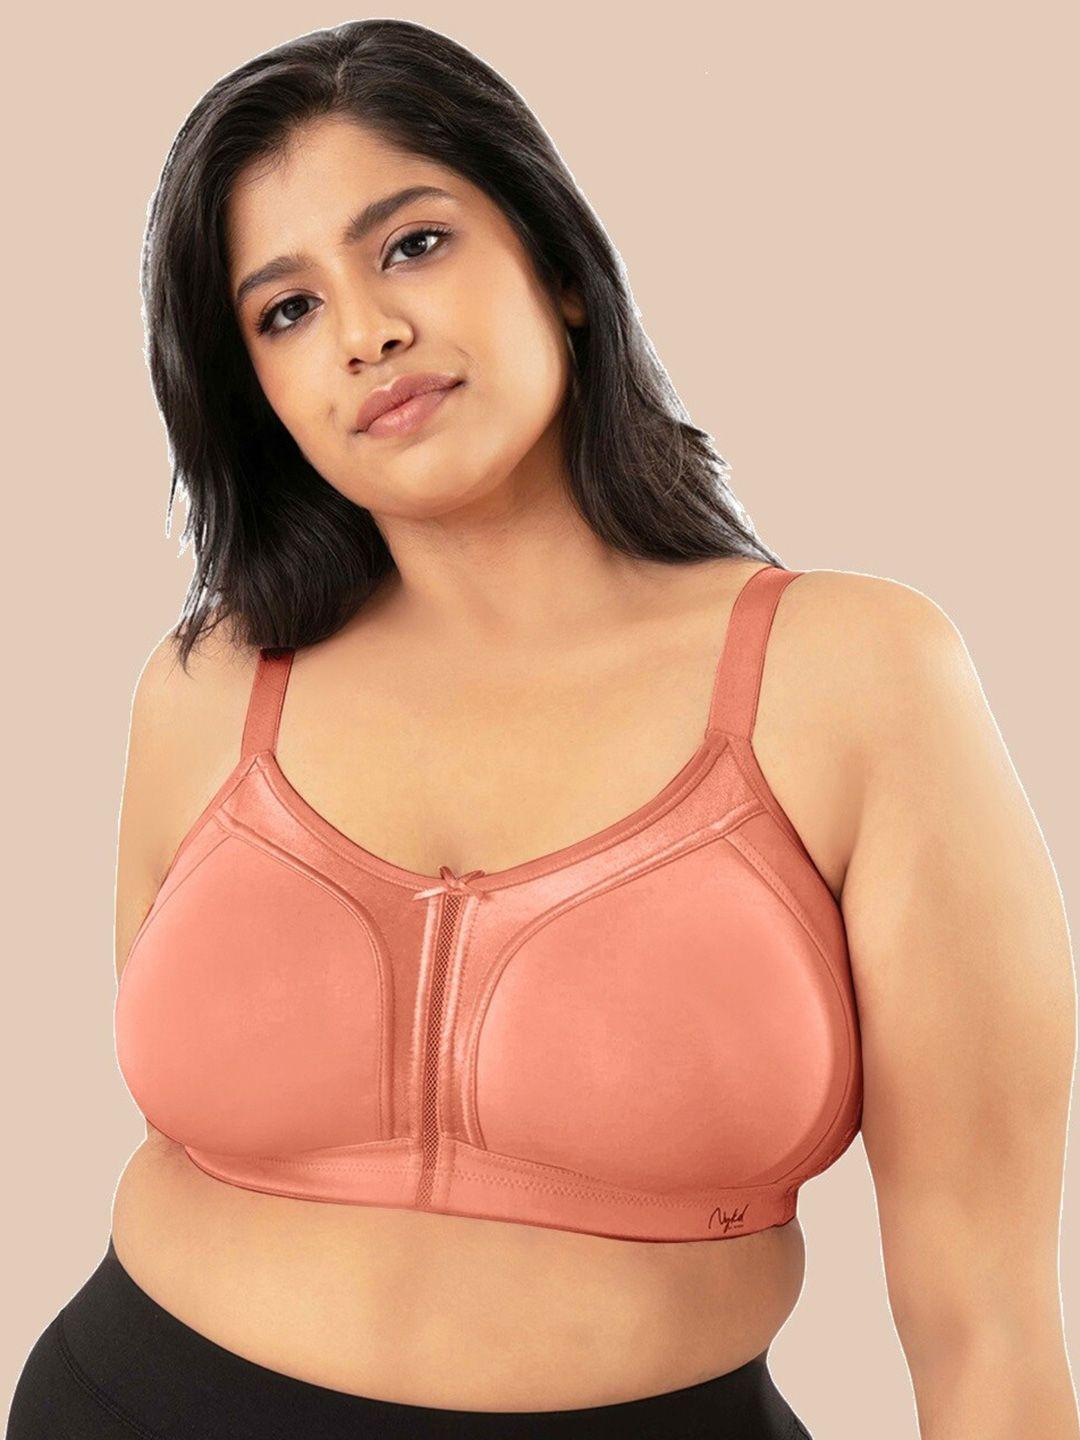 nykd-full-coverage-cotton-non-padded-wireless-m-frame-heavy-bust-everyday-bra